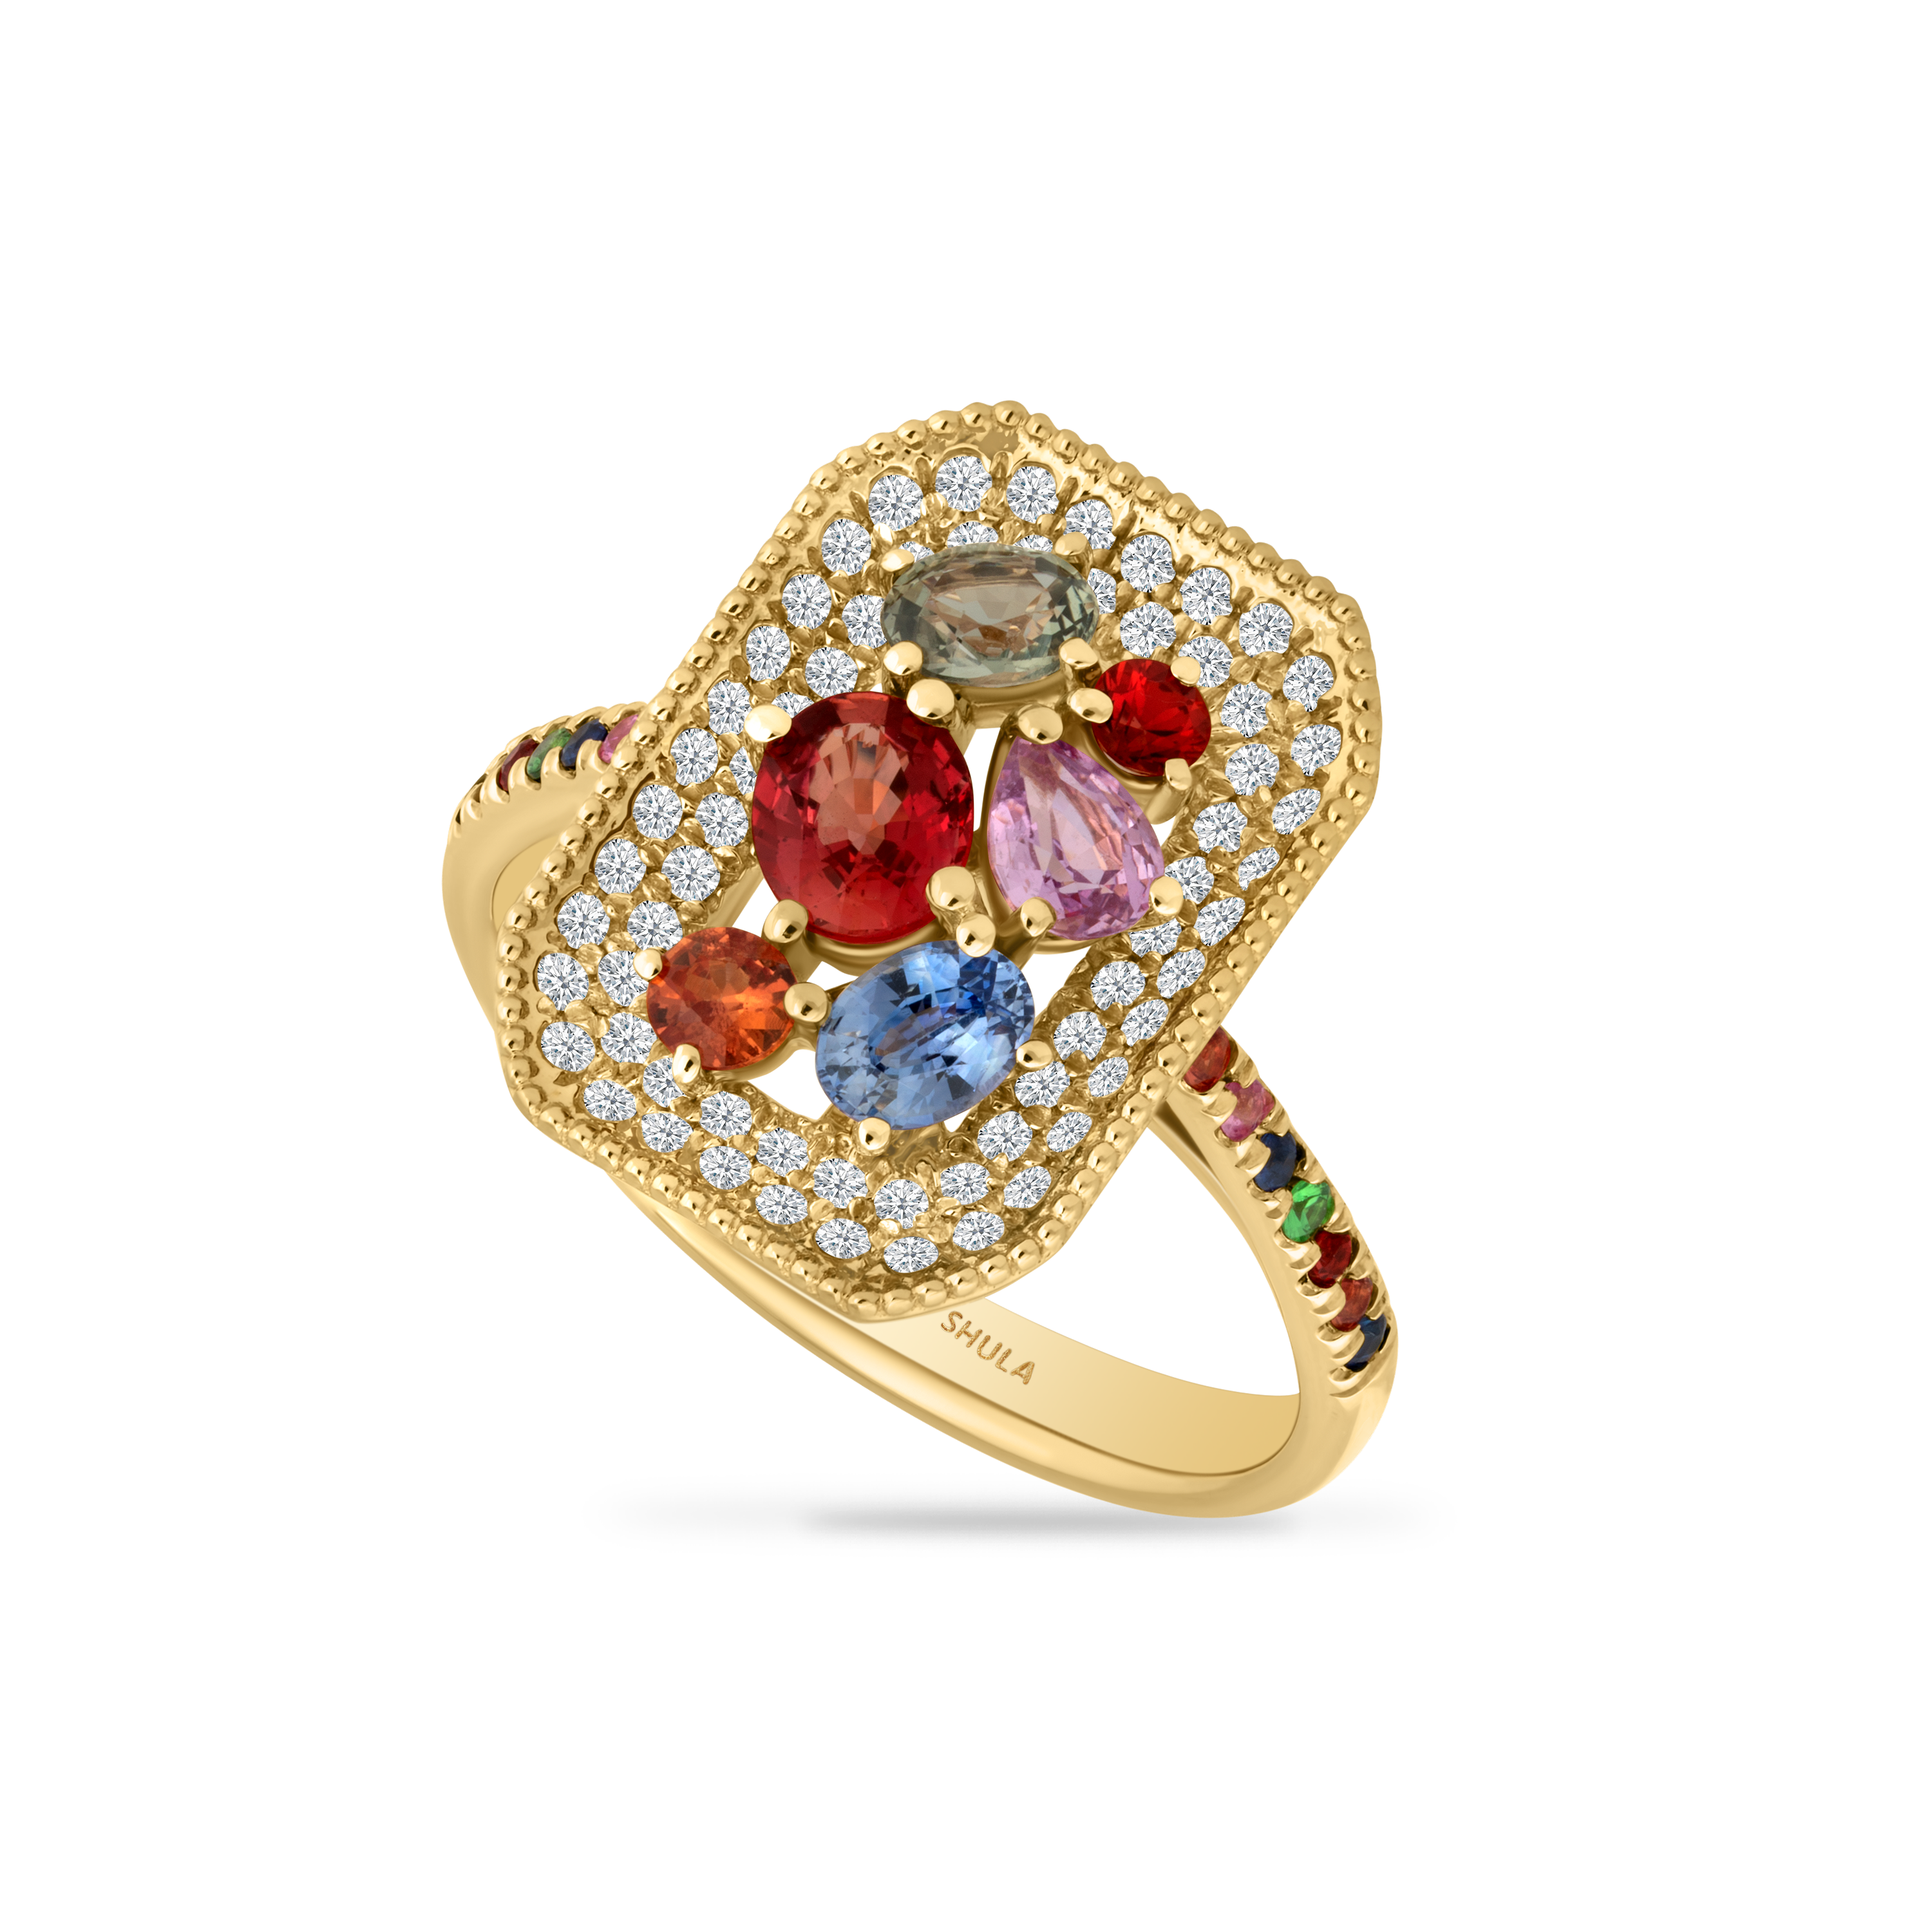 14K RING WITH 64 DIAMONDS 0.28CT, 18 FANCY COLOR SAPPHIRES 1.22CT & 2 GREEN GARNETS 0.04CT